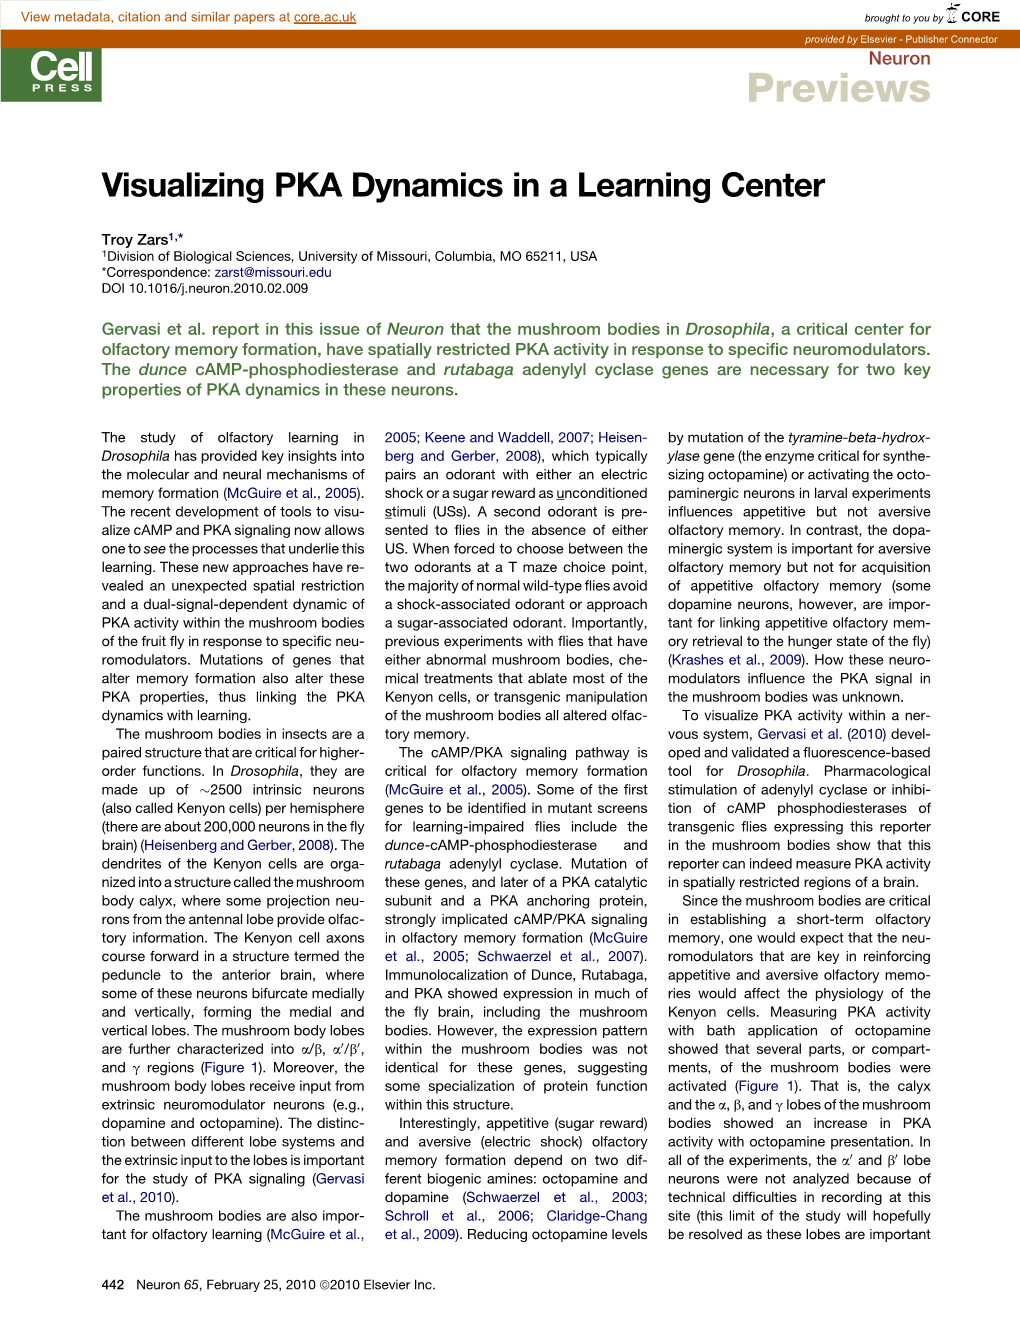 Visualizing PKA Dynamics in a Learning Center